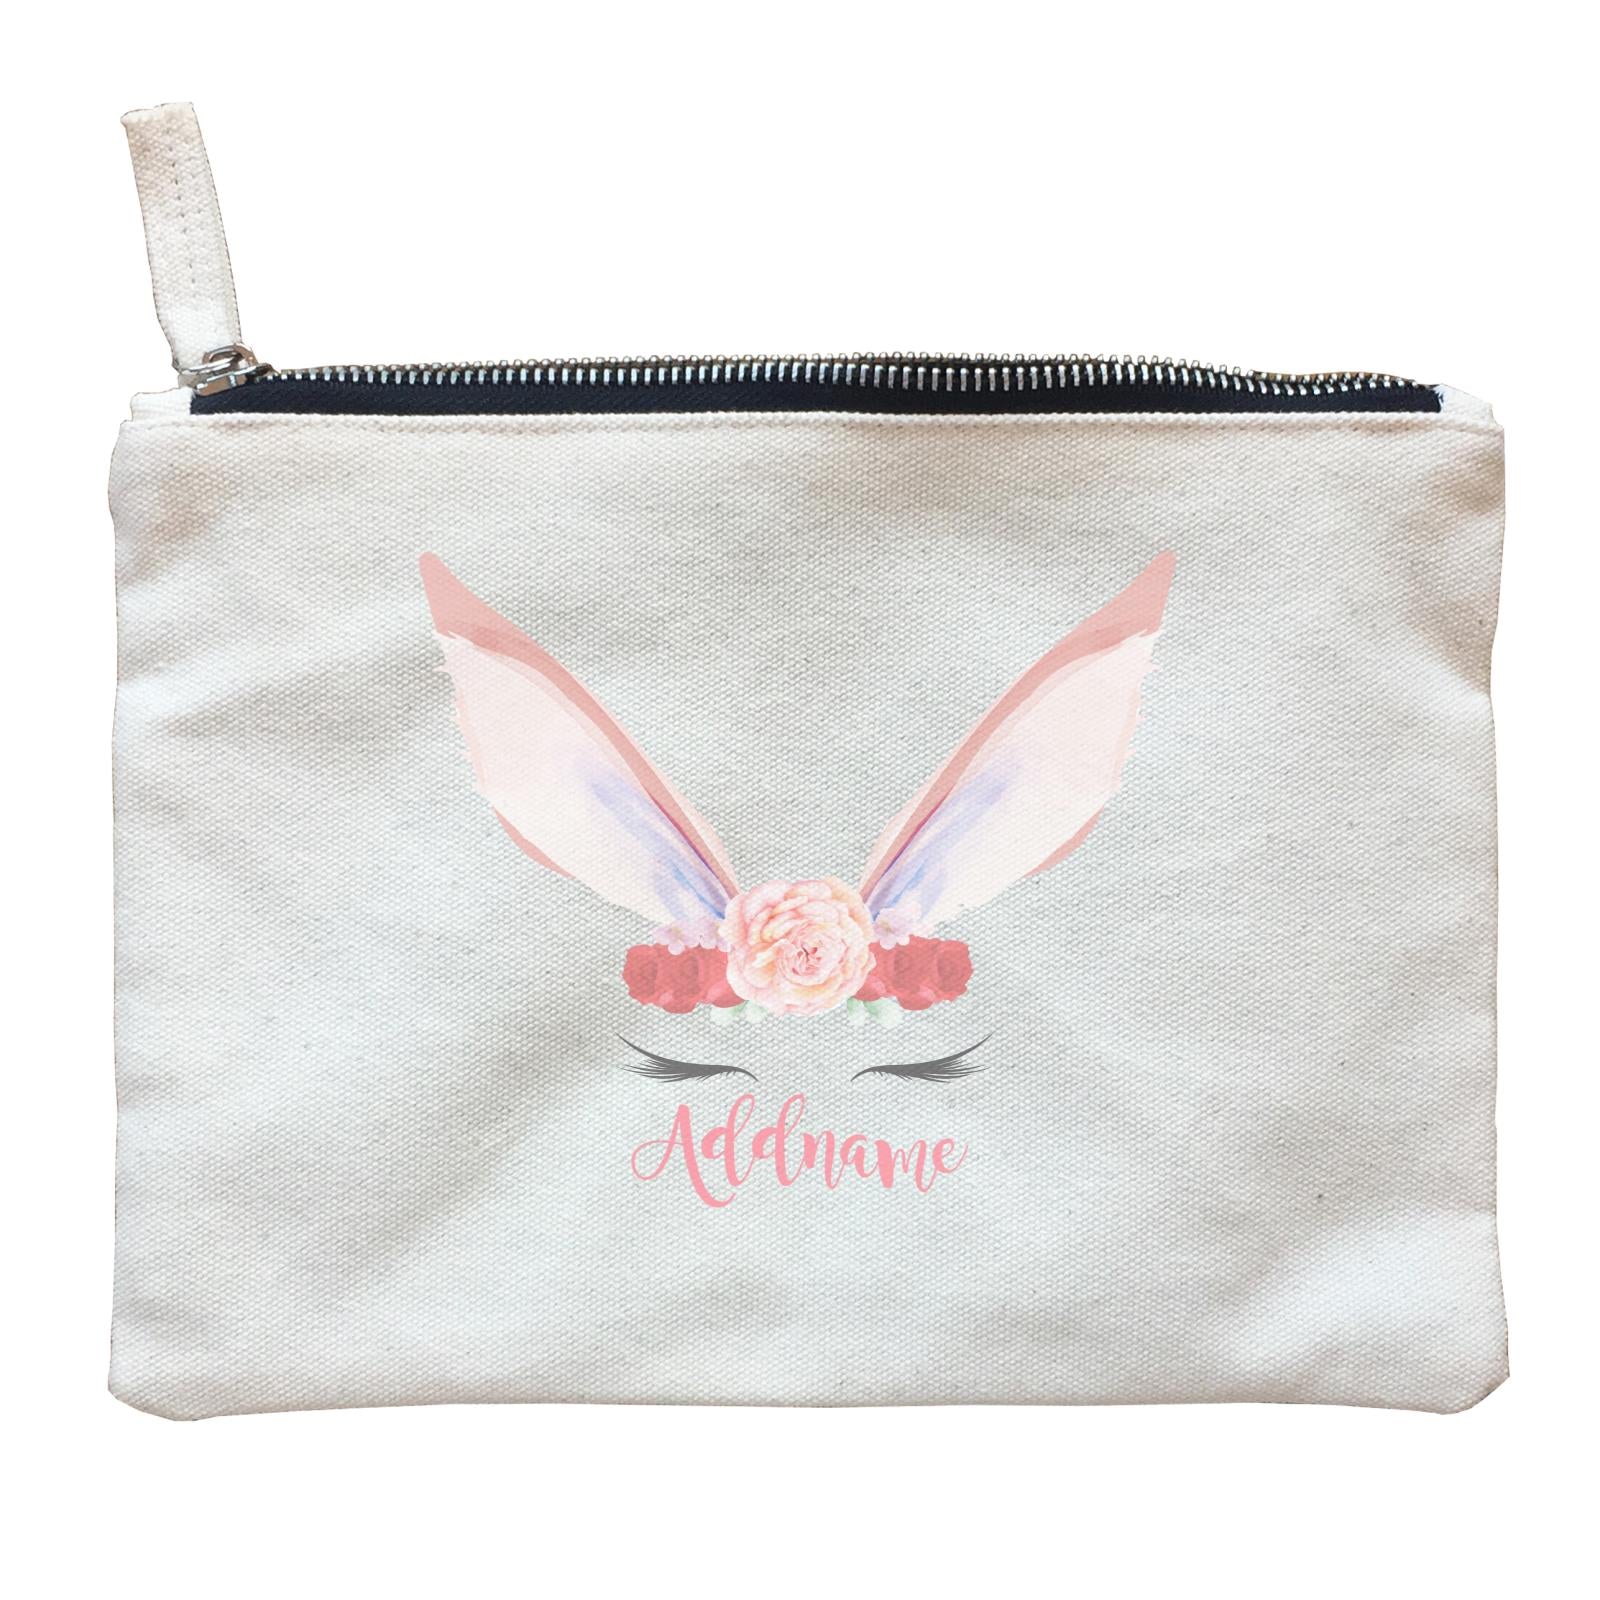 Pink and Red Roses Garland Bunny Face Addname Zipper Pouch